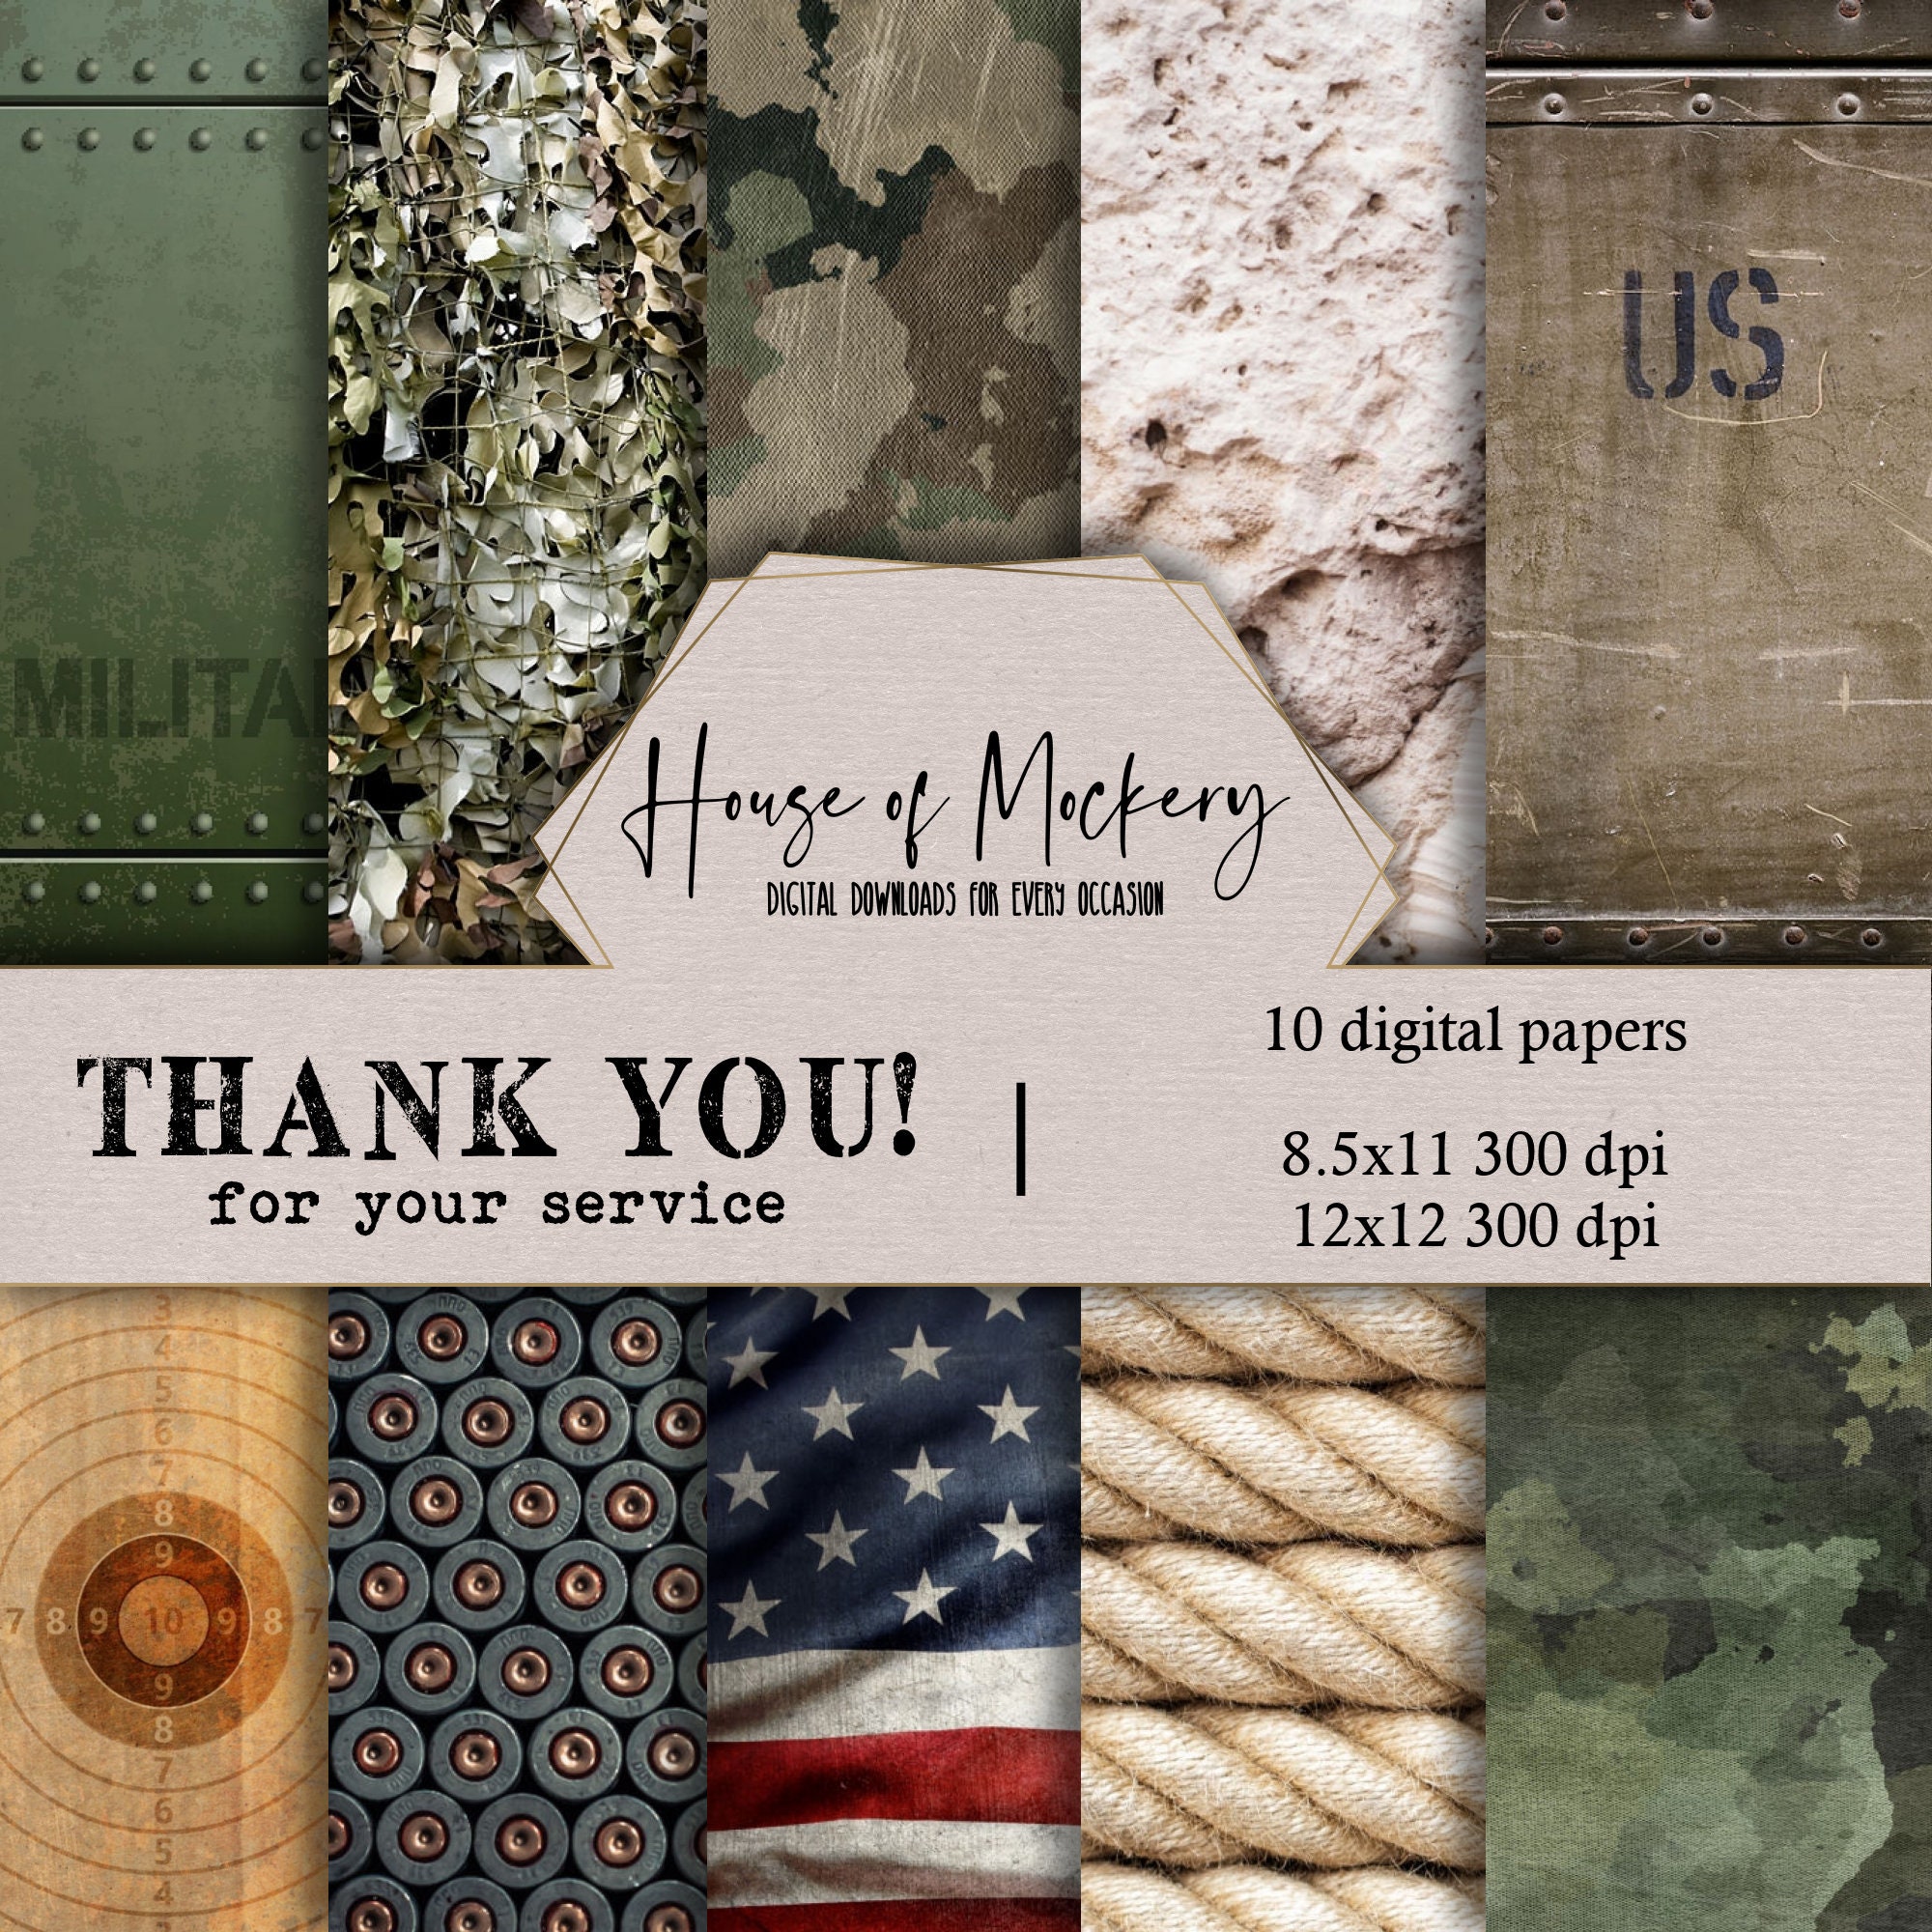 Fabrika Decoru Military Style 12x12 Paper Pad, Army Scrapbook Papers,  Camouflage Background Crafting Paper, Armed Forces Scrapbooking Kit 